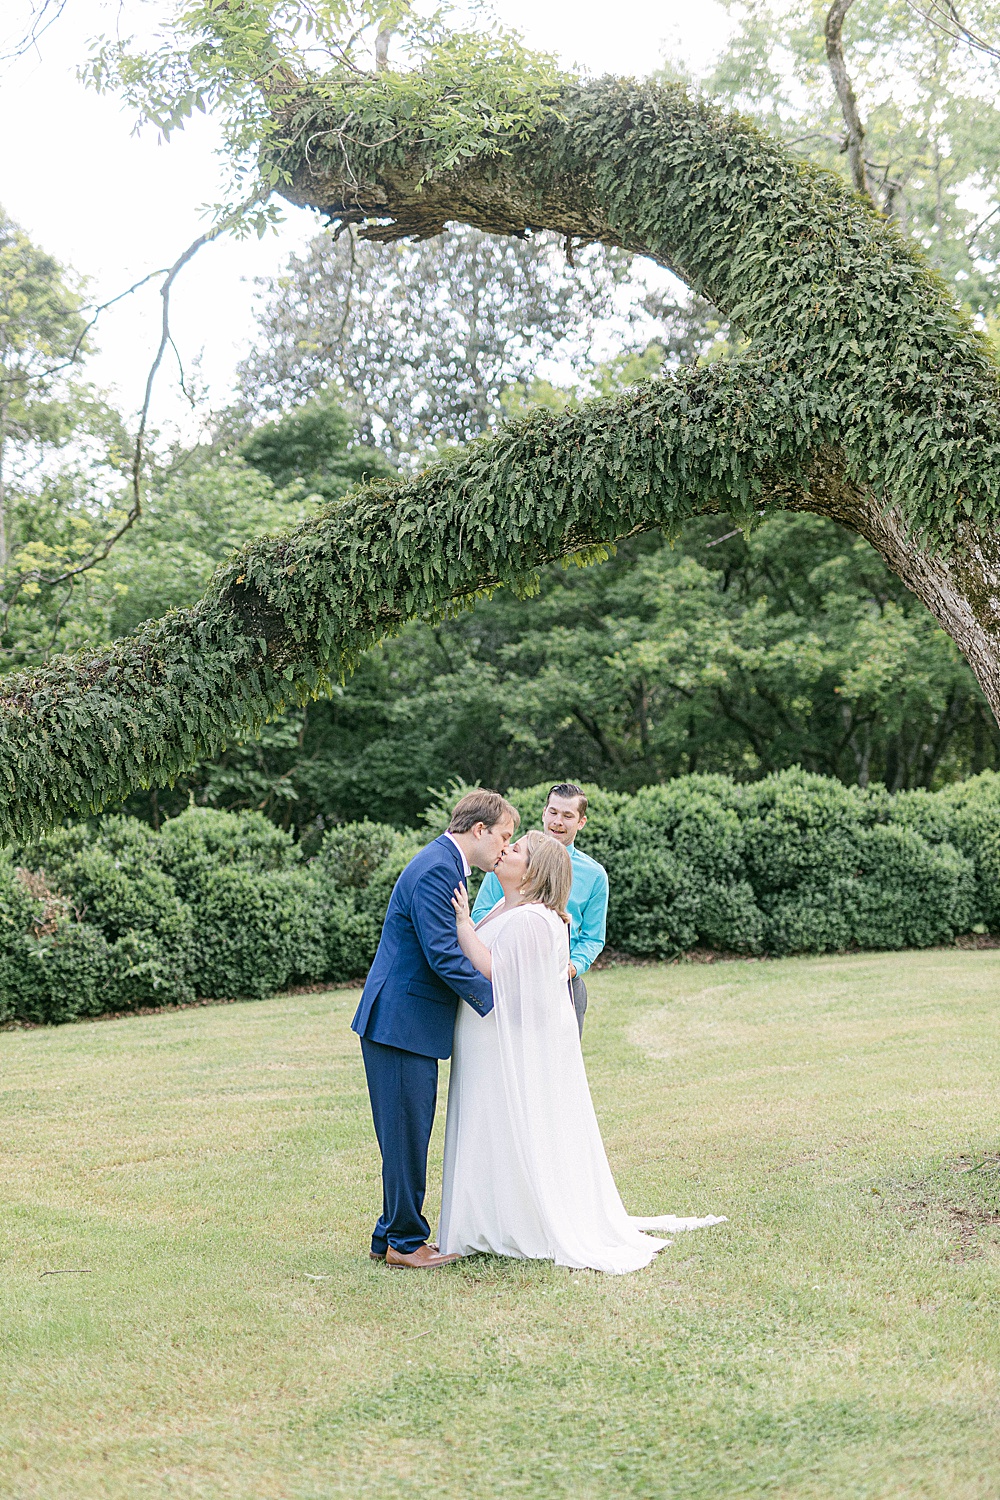 Elopement ceremony with G&A Weddings captured by Laura Watson photography